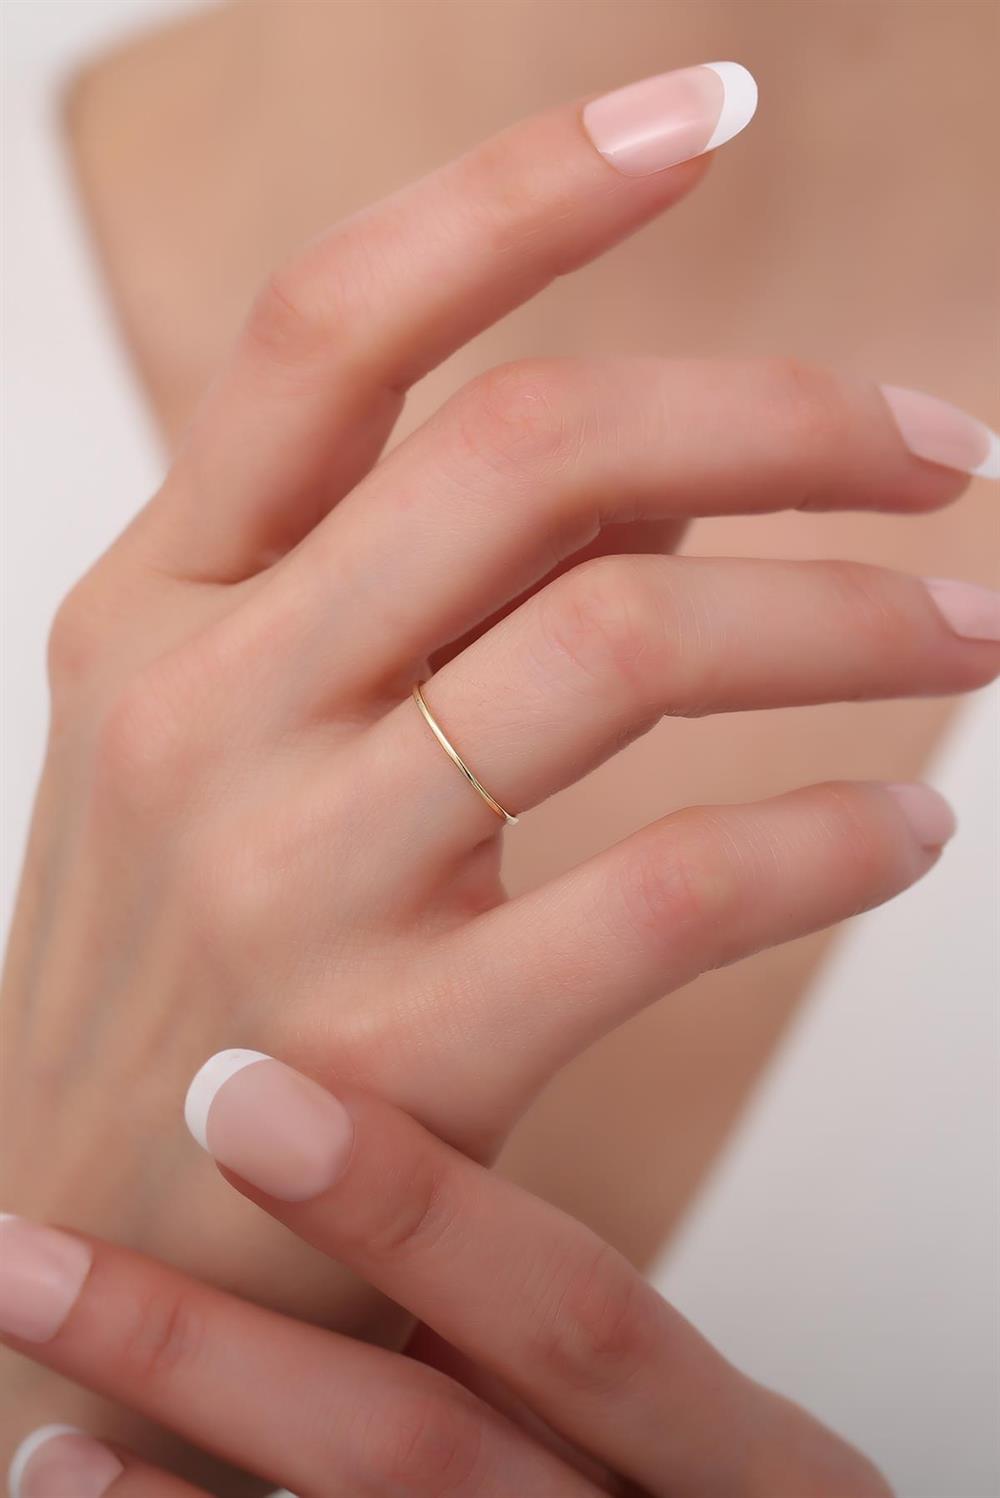 18K Gold Filled Ring, Gold Thin Ring, Gold Band Ring, Delicate Simple Ring,  Gold Stackable Ring, Super Thin Minimalistic Ring, Layering Ring - Etsy